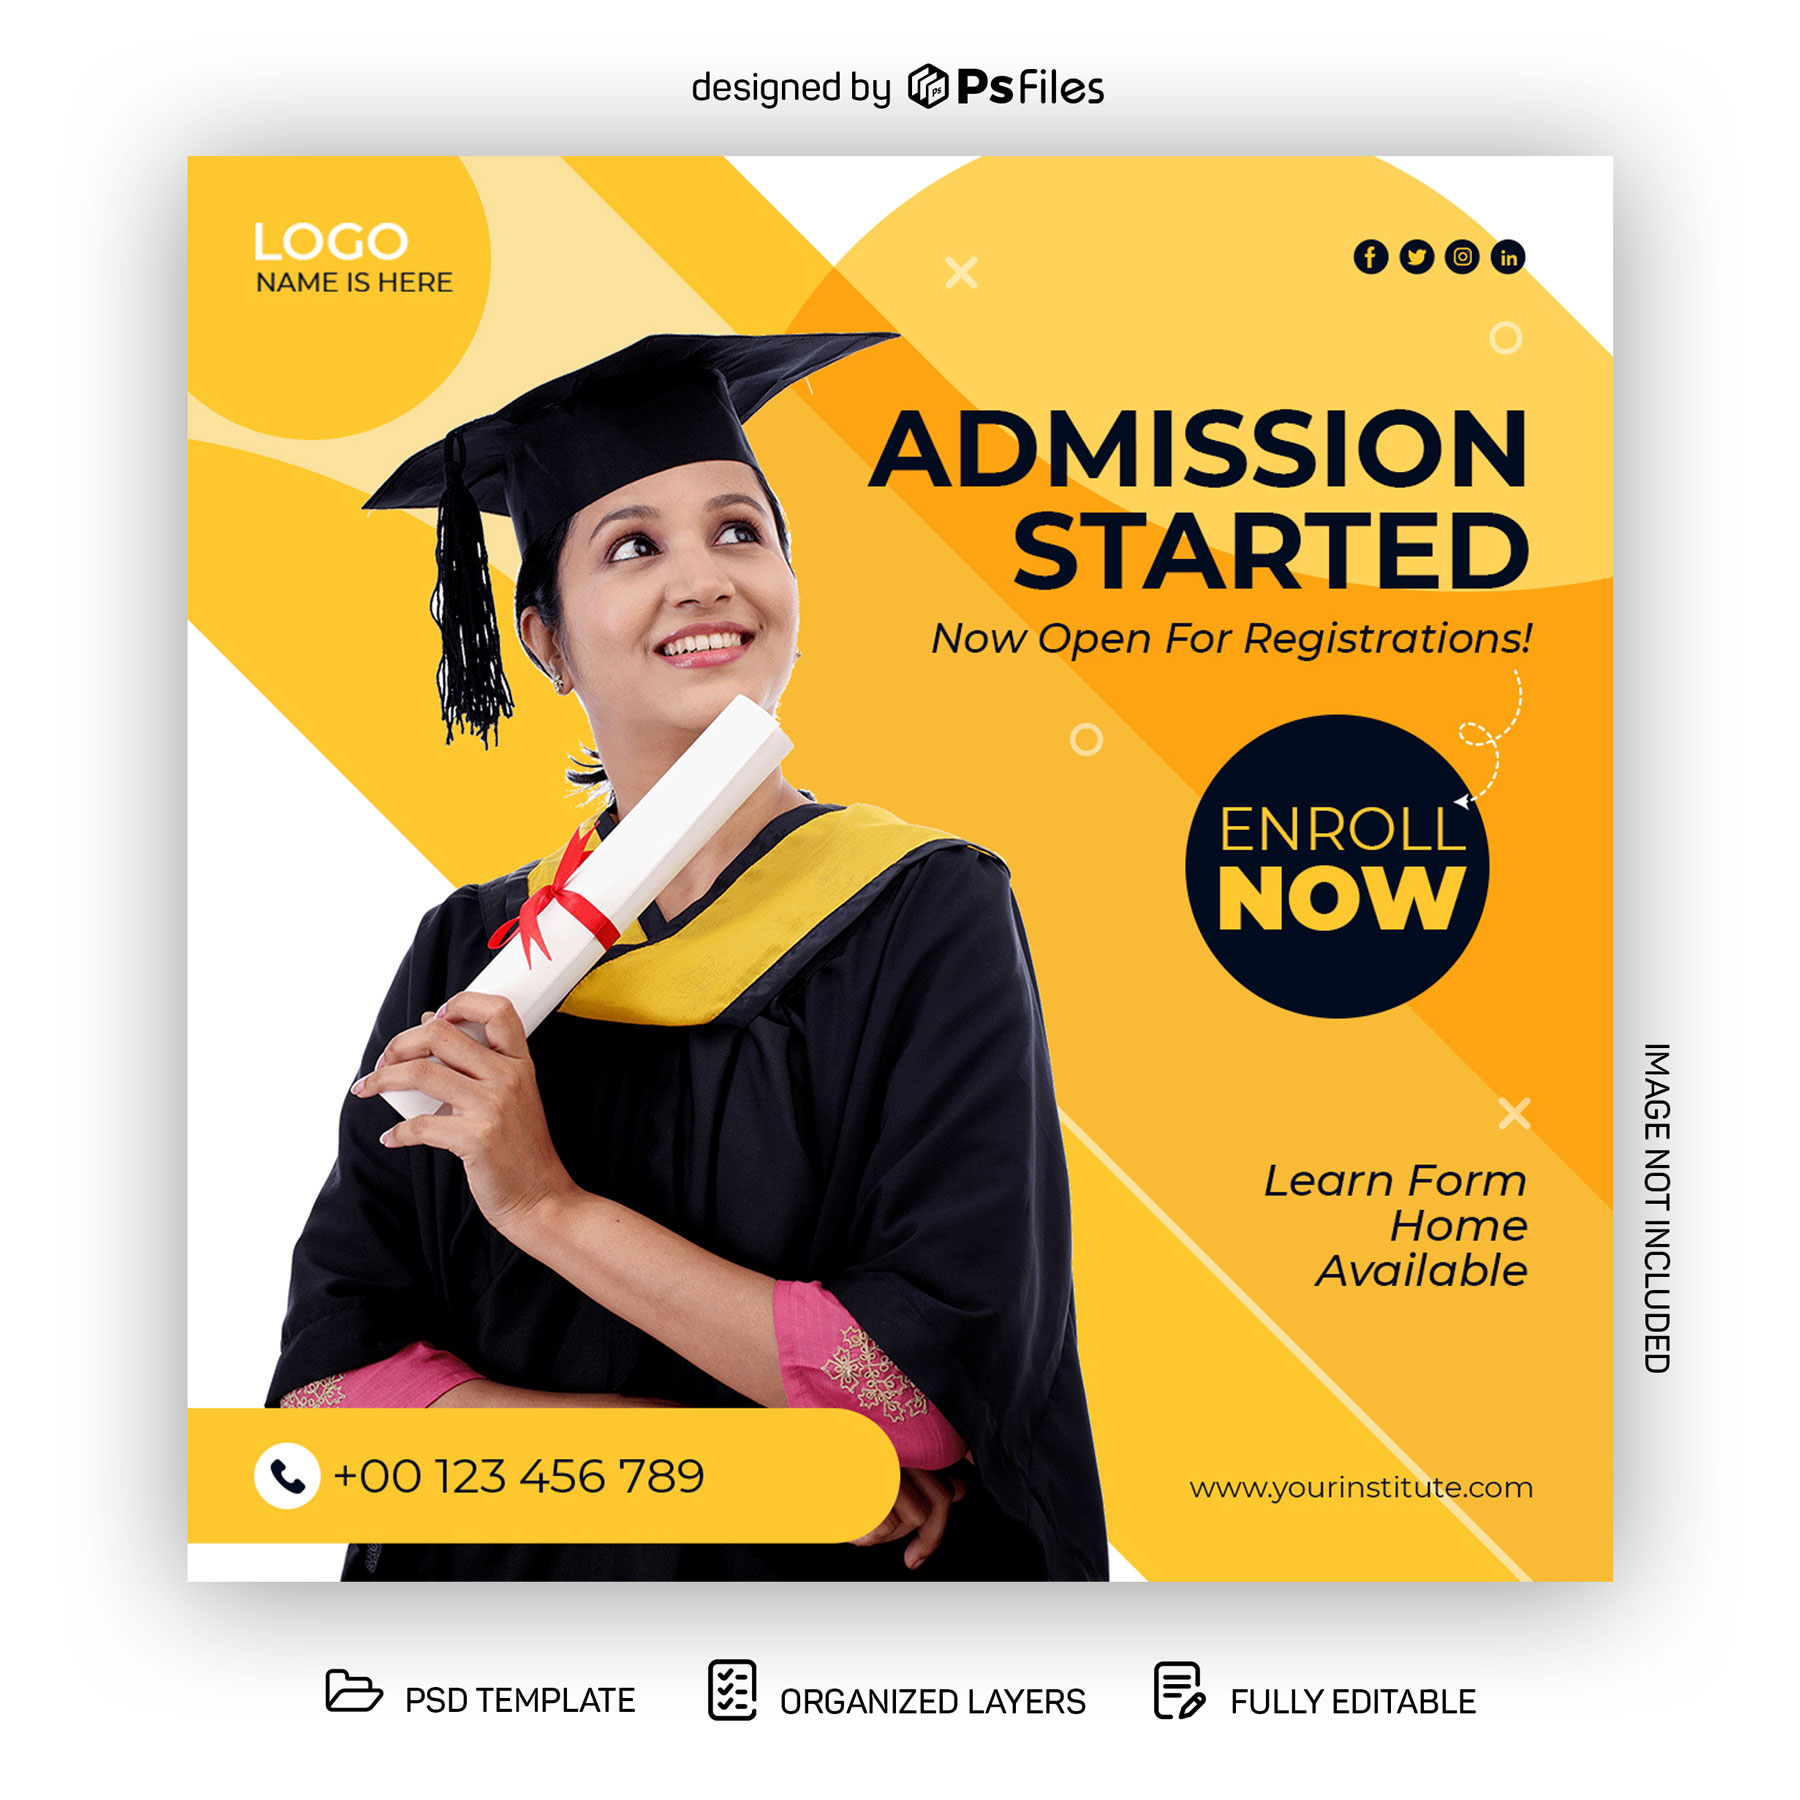 PsFiles Free College Admission started Instagram Post Design PSD Template